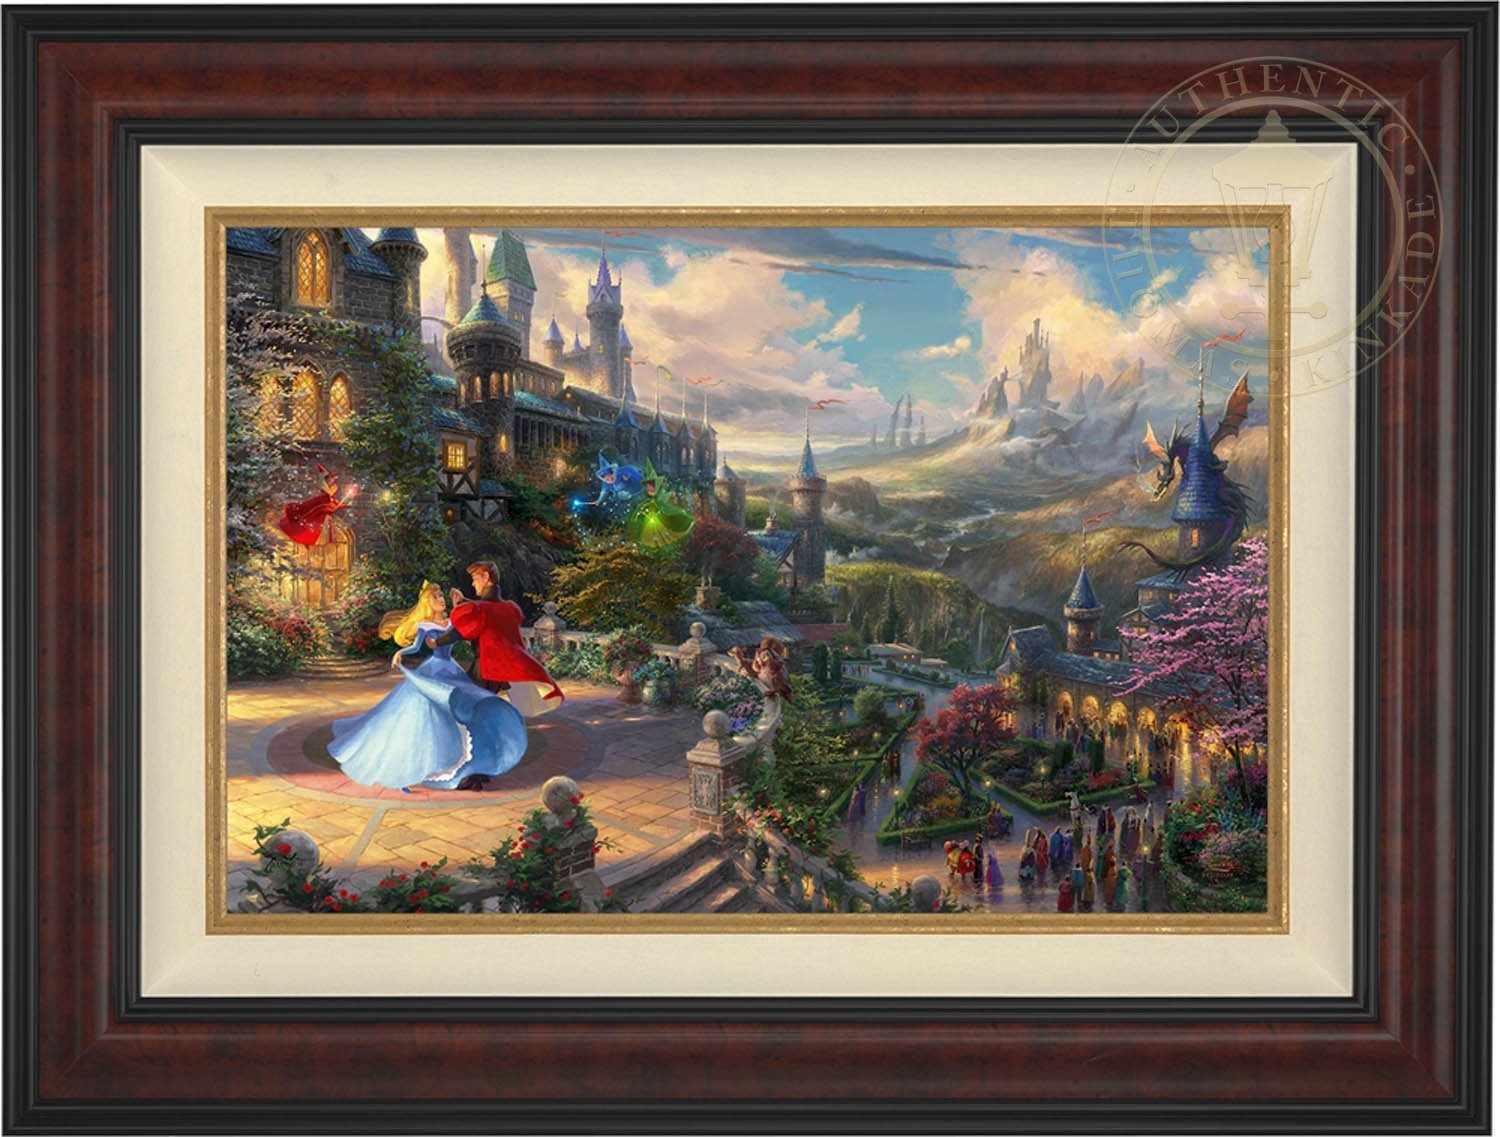 Prince Phillip has awakened Princess Aurora with true love’s kiss, dancing in courtyard under an enchanted light streaming down from the good fairies - Burl Frame